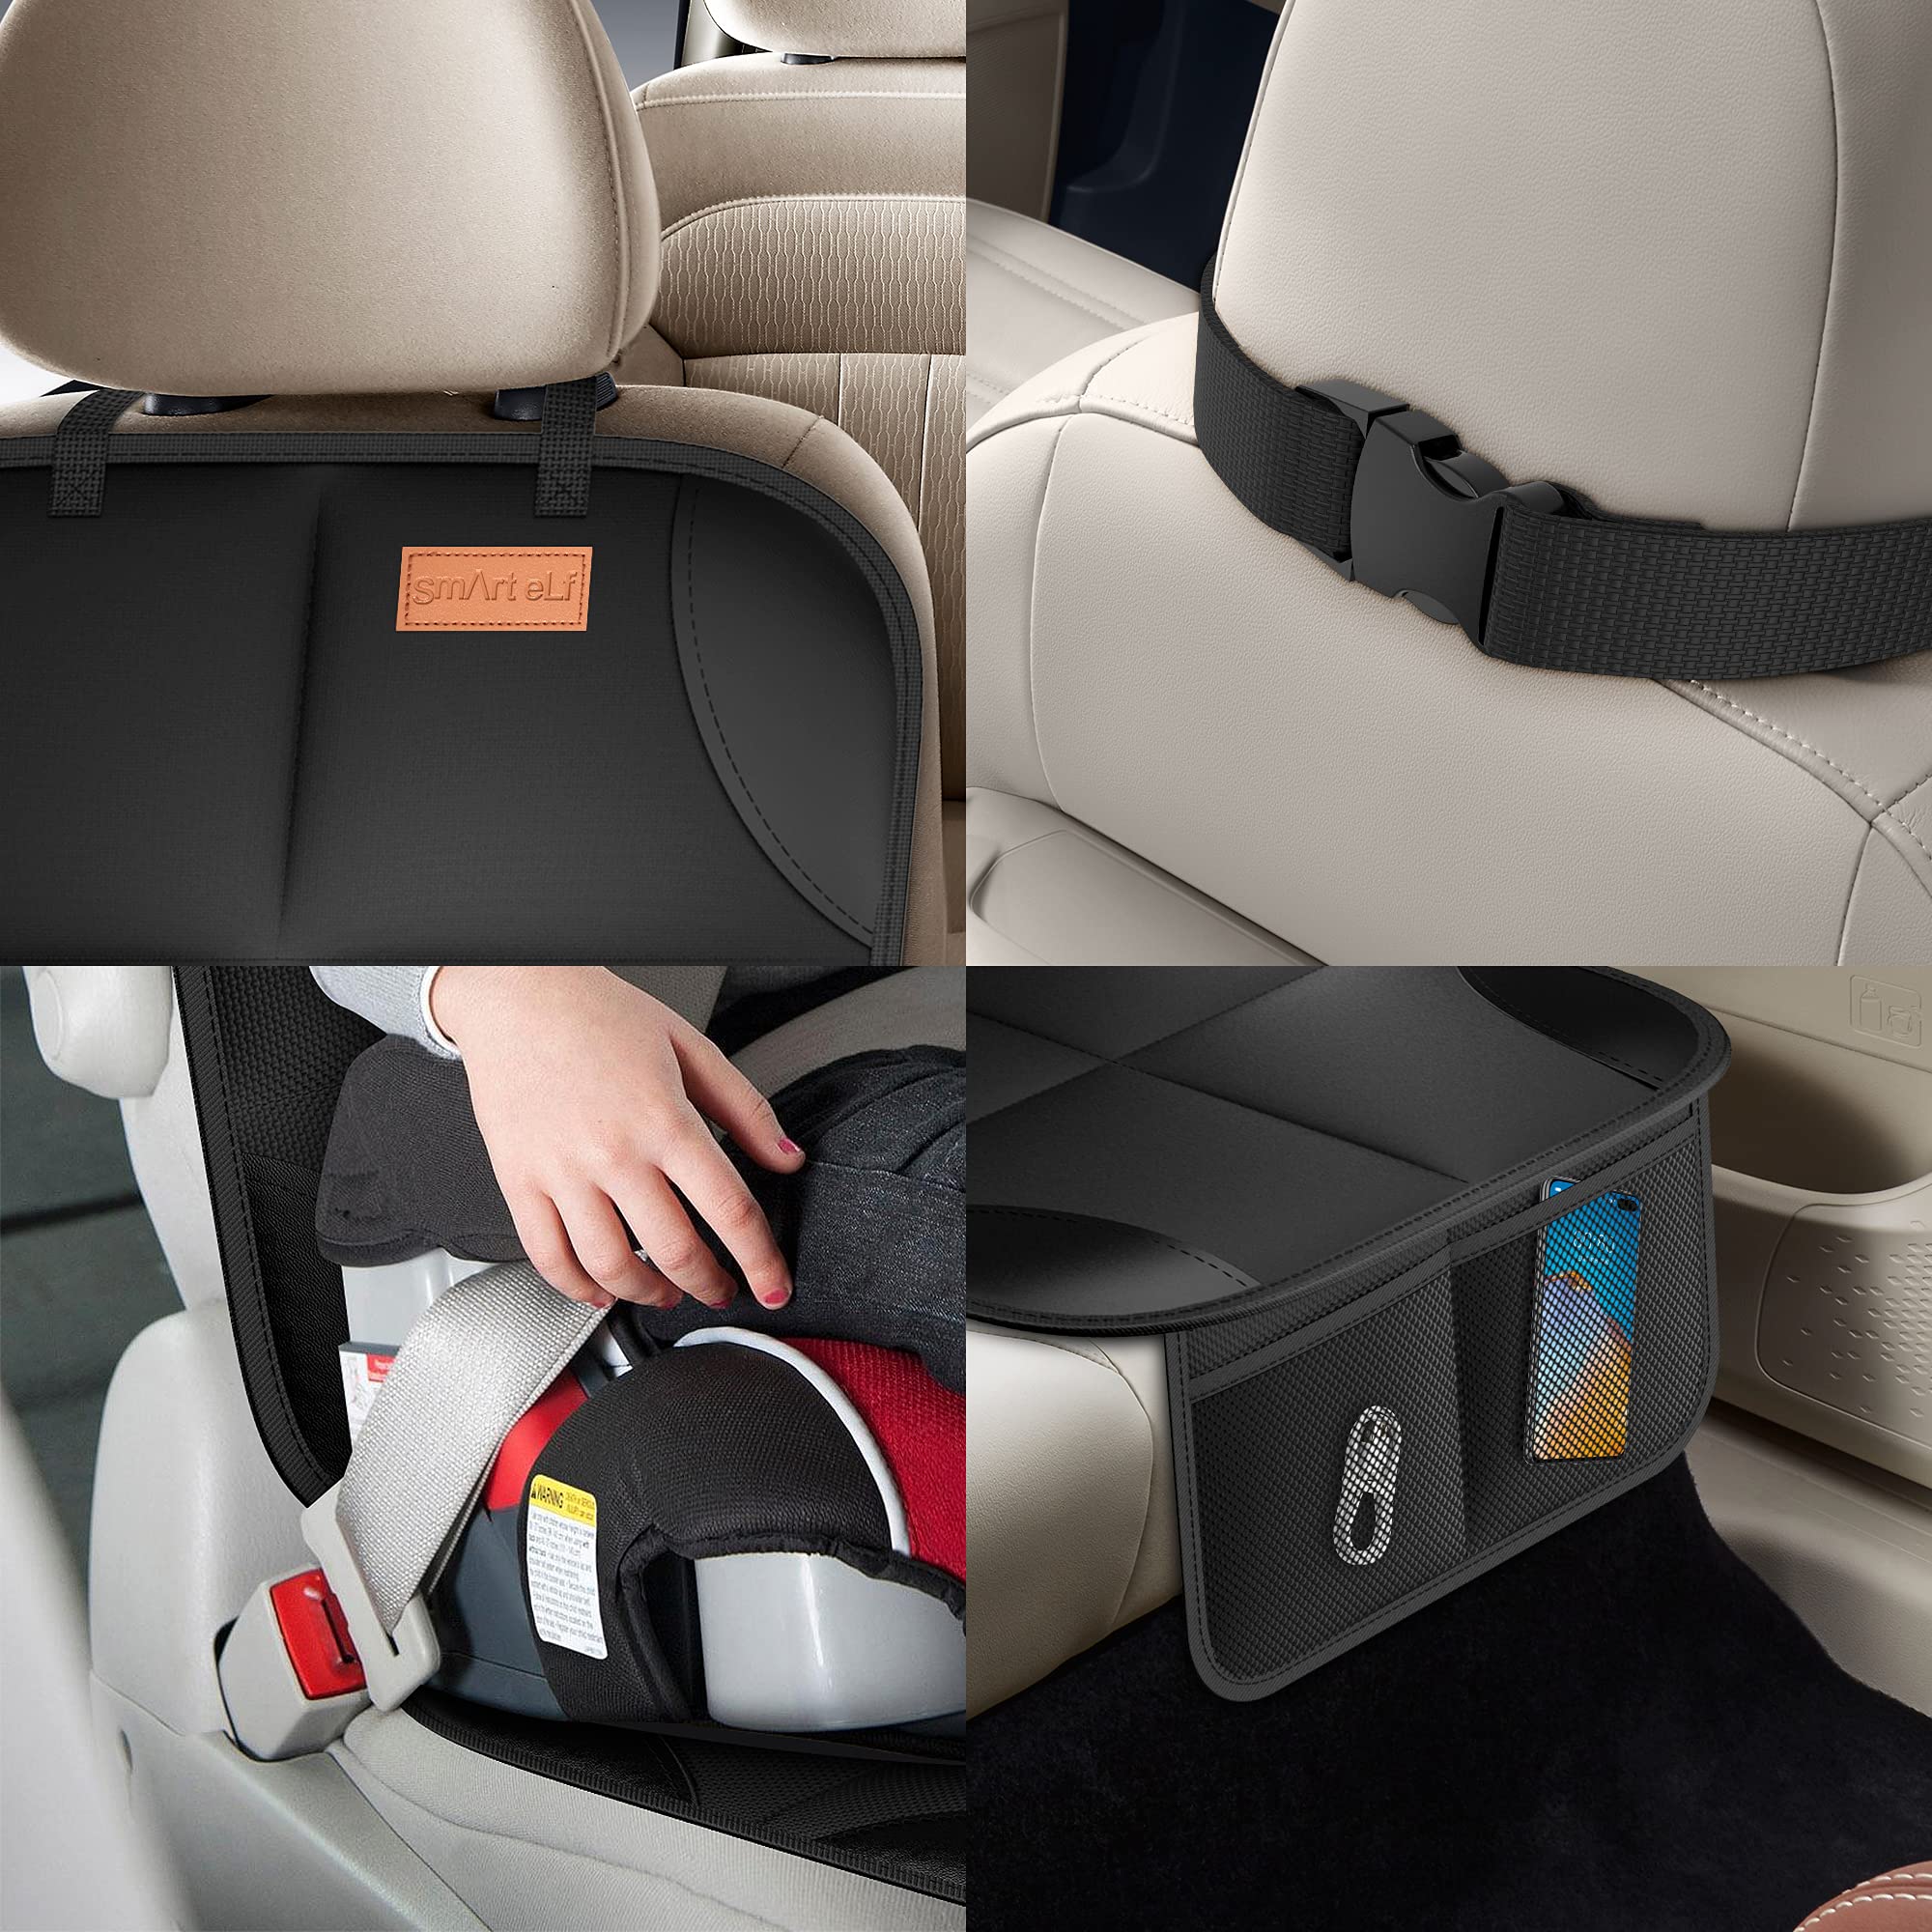 Car Seat Protector, Smart eLf 2Pack , Protect Child Seats with Thickest Padding and Non-Slip Backing Mesh Pockets for Baby and Pet